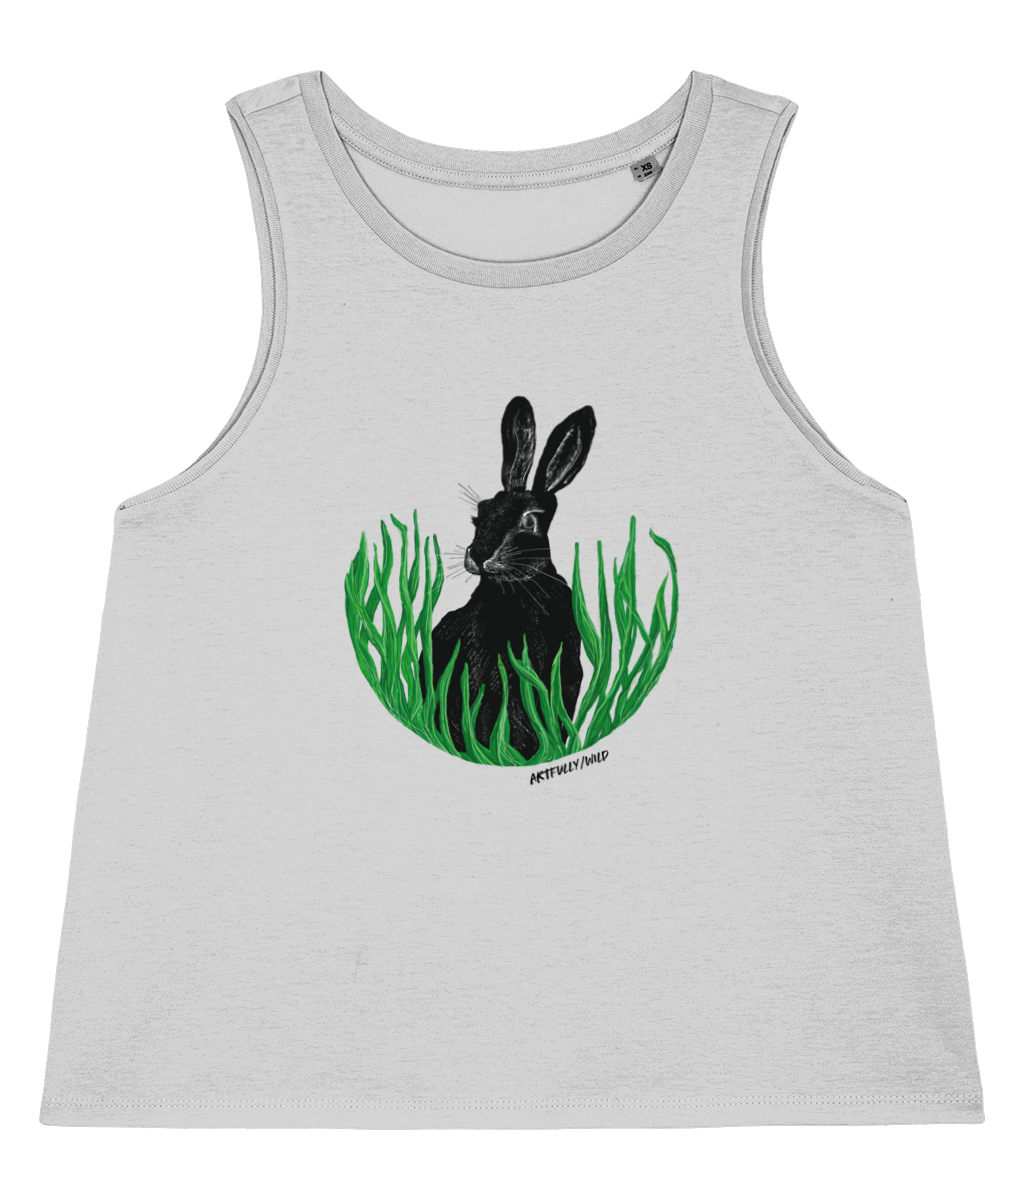 ‘HARE IN THE GRASS’ Women’s Grey Marl Dancer Tank Top Vest Made with Sustainable Organic Cotton. British Wildlife Original Illustration by Artfully/Wild.